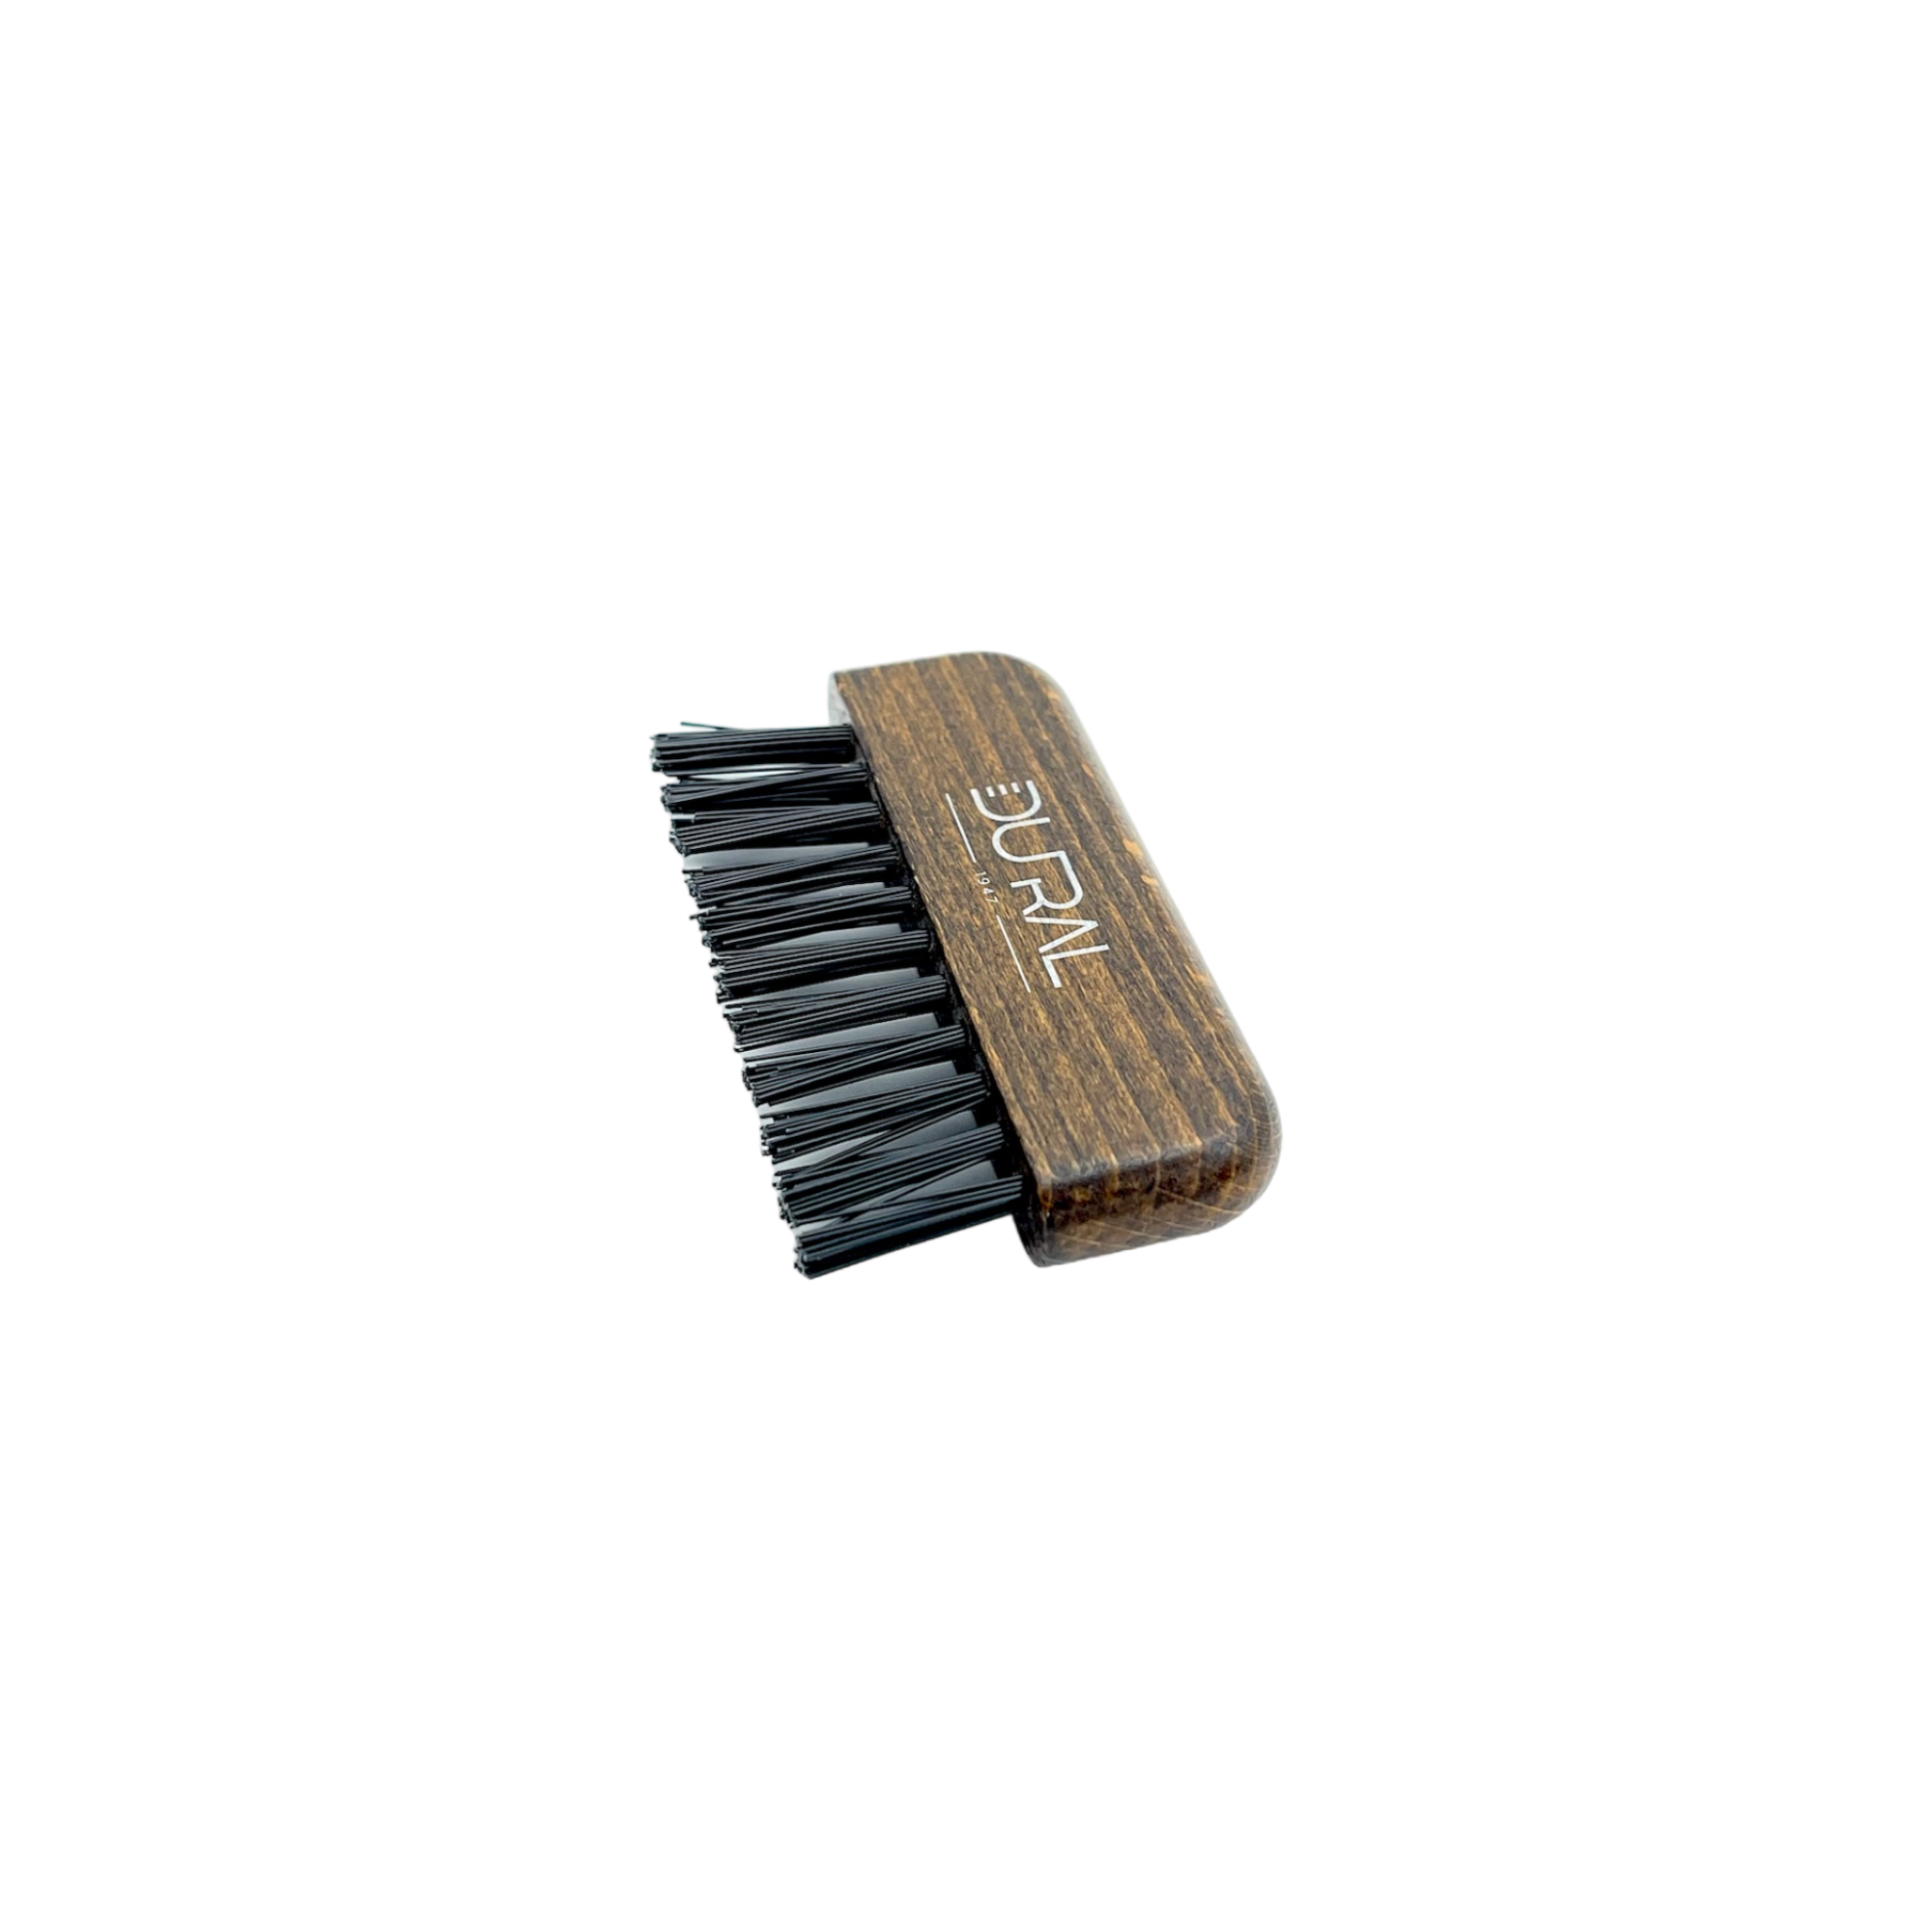 Dural Beech wood brush & comb cleaner